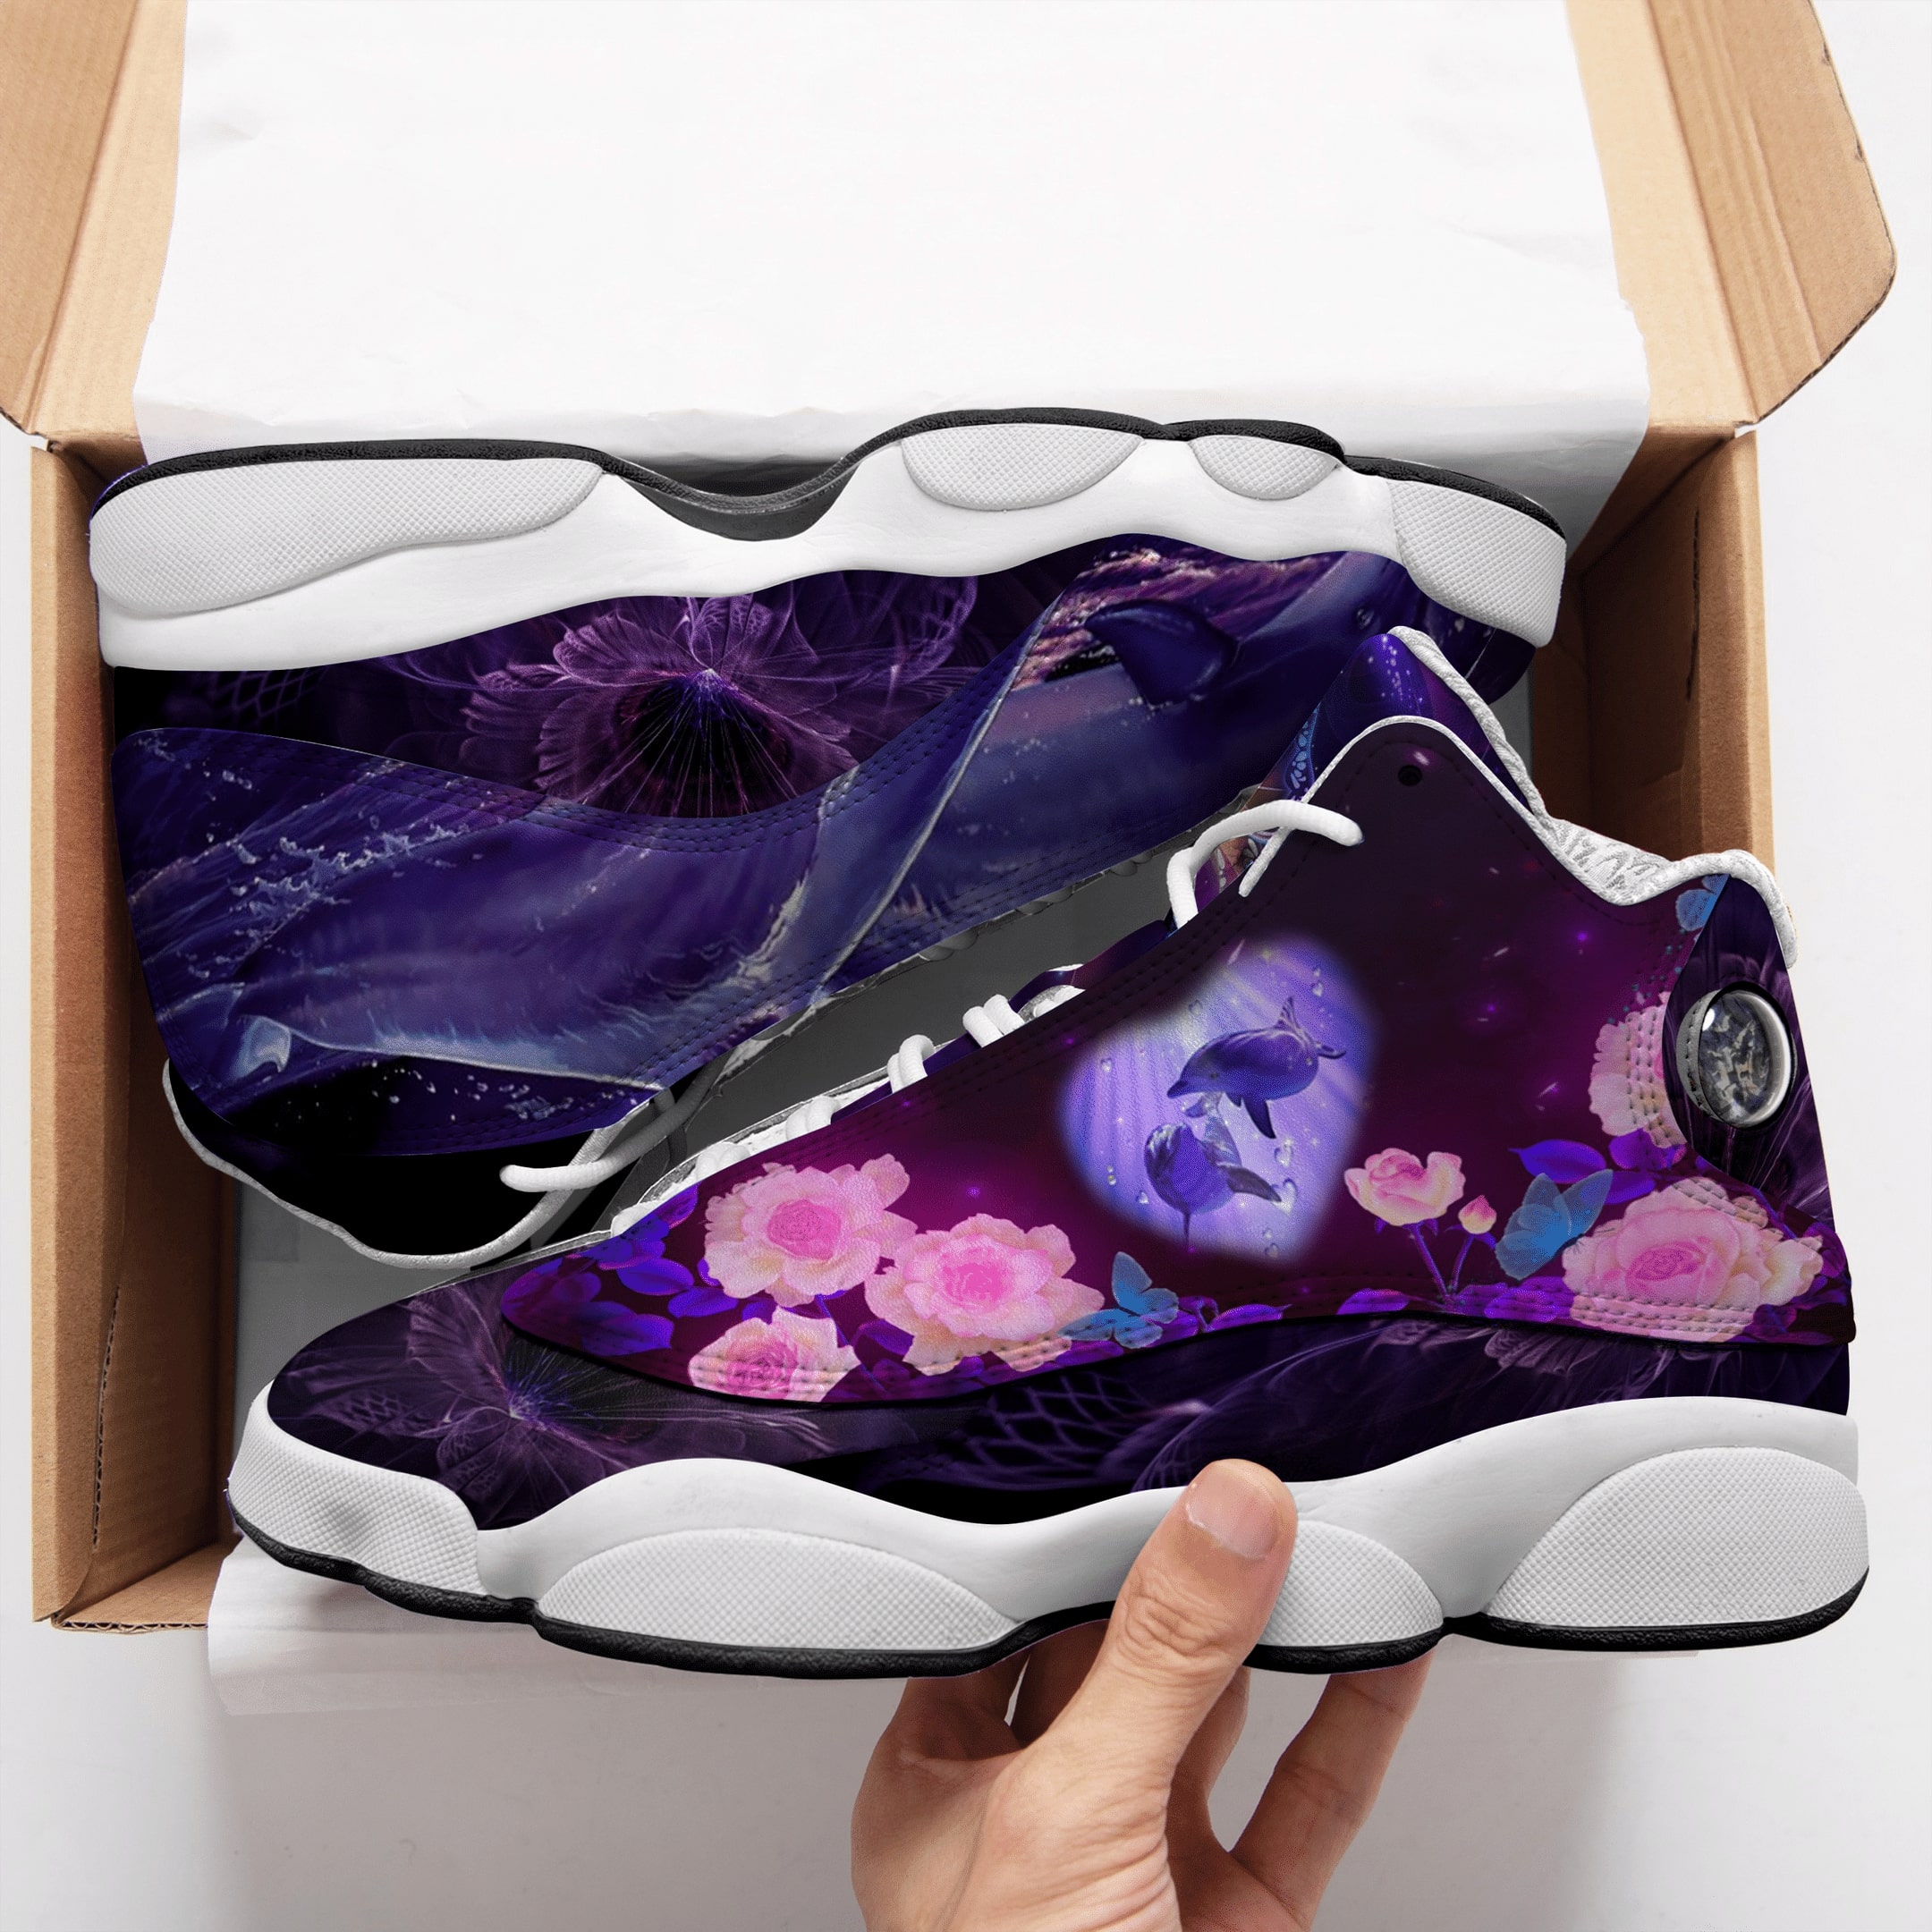 floral dolphin all over printed air jordan 13 sneakers 4